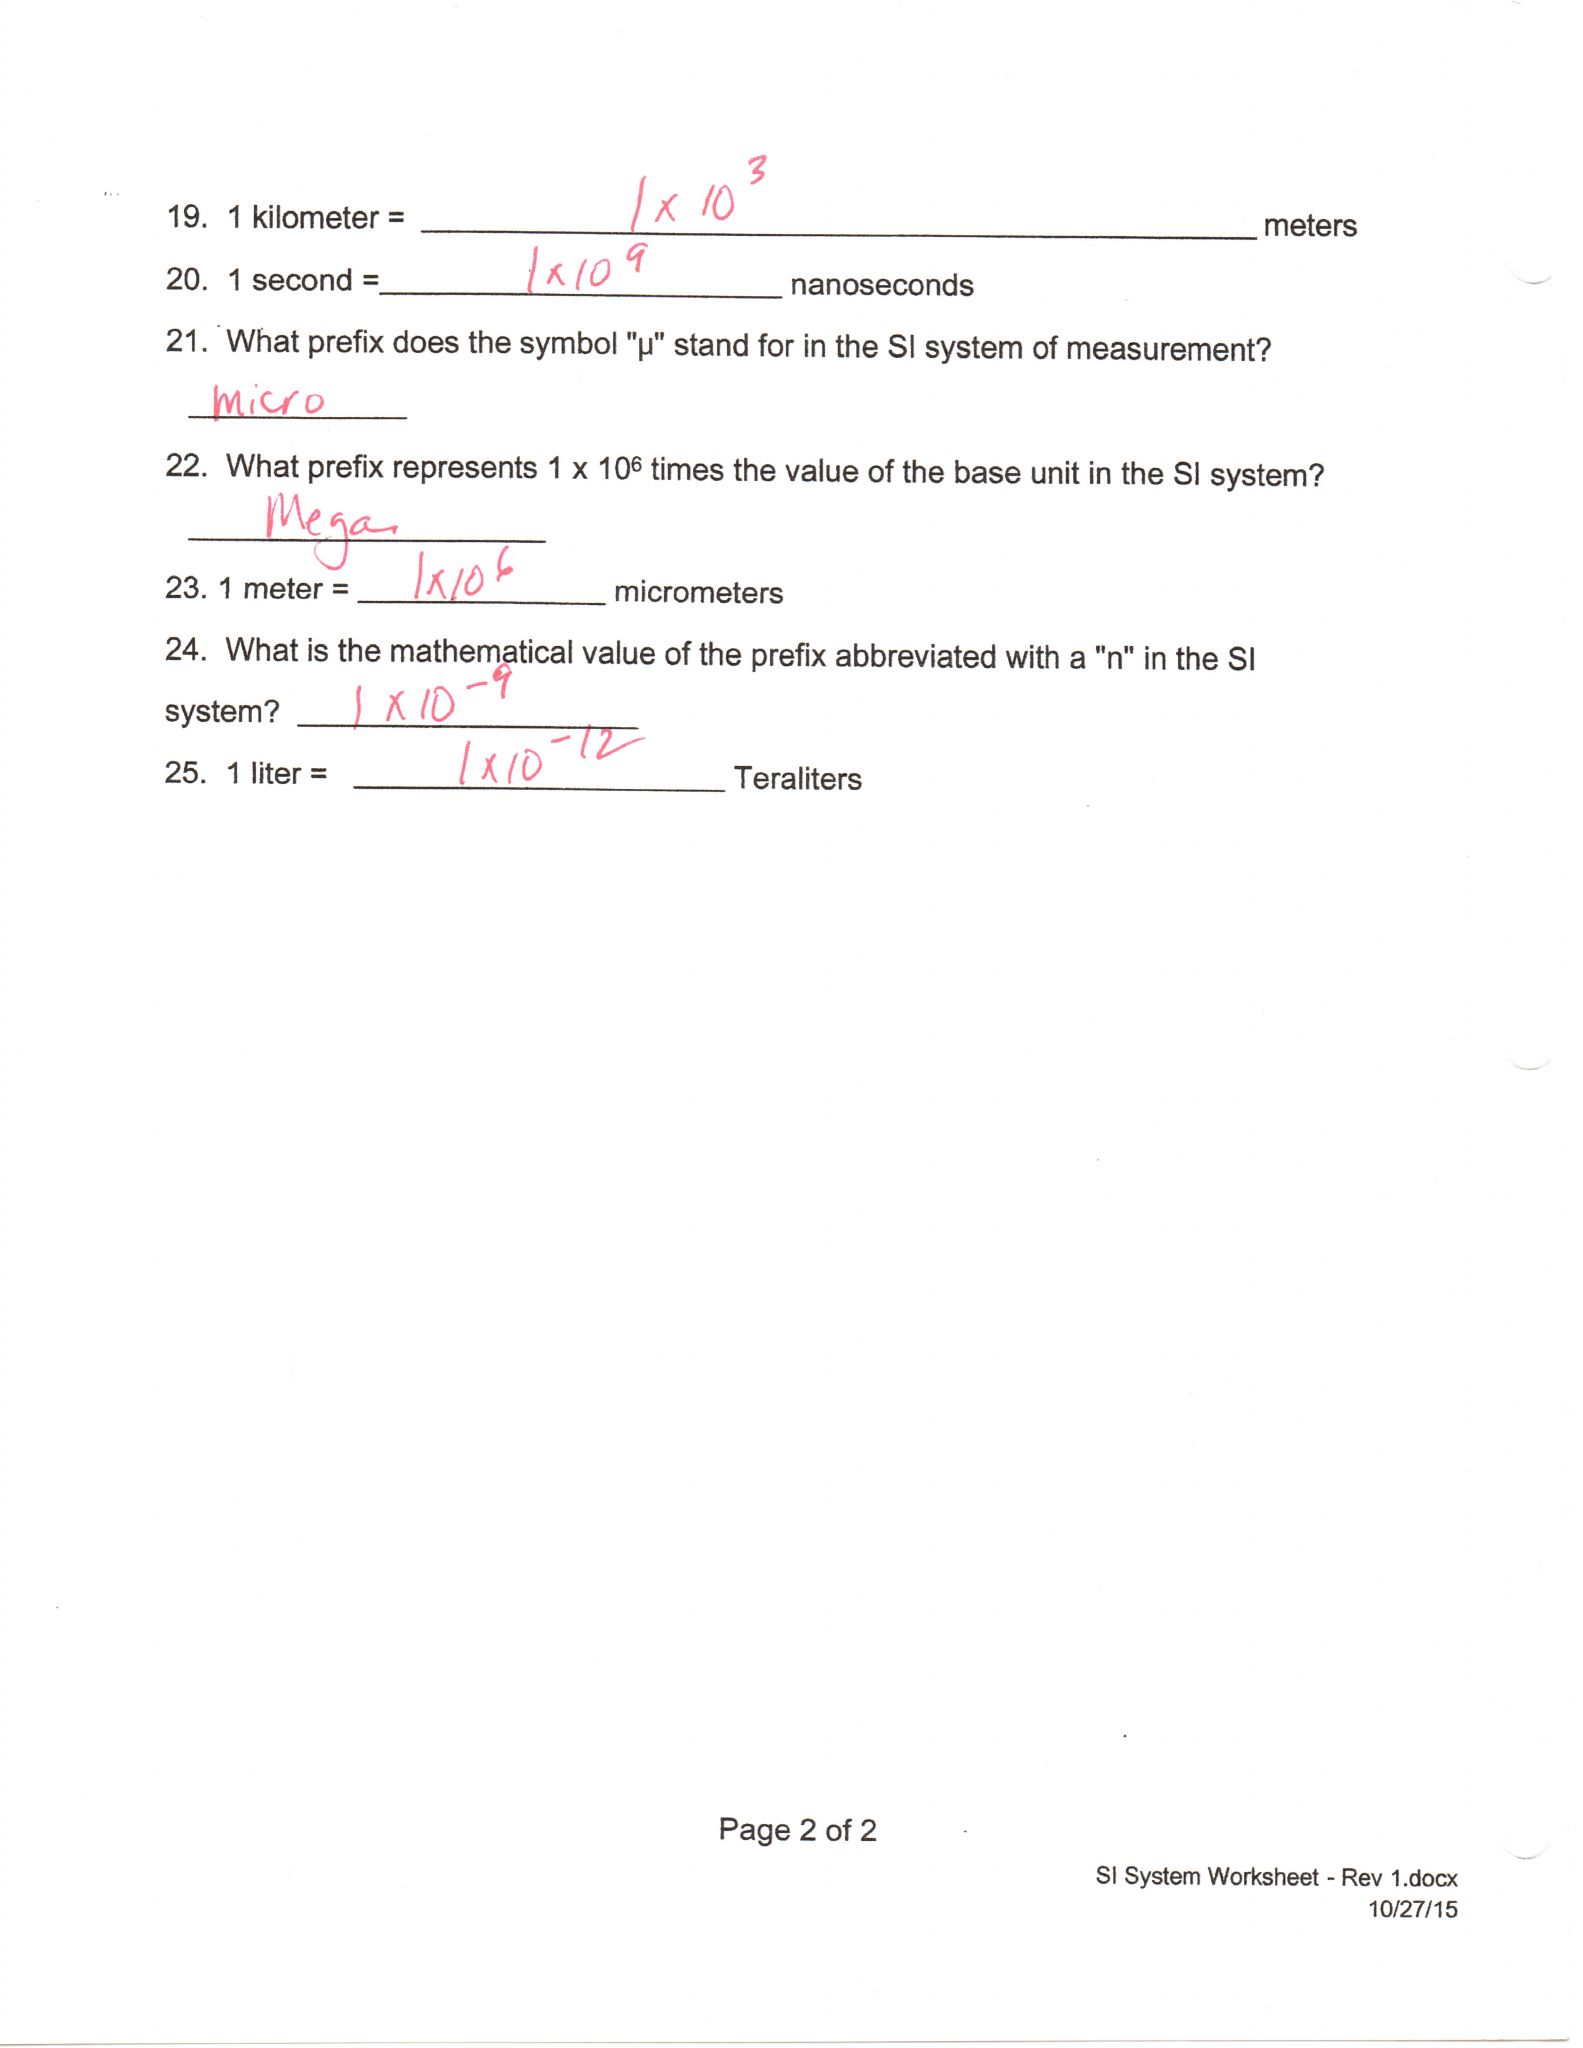 Worksheet Labeling Waves Answer Key as Well as Lutz George Chemistry 1 Academic Documents